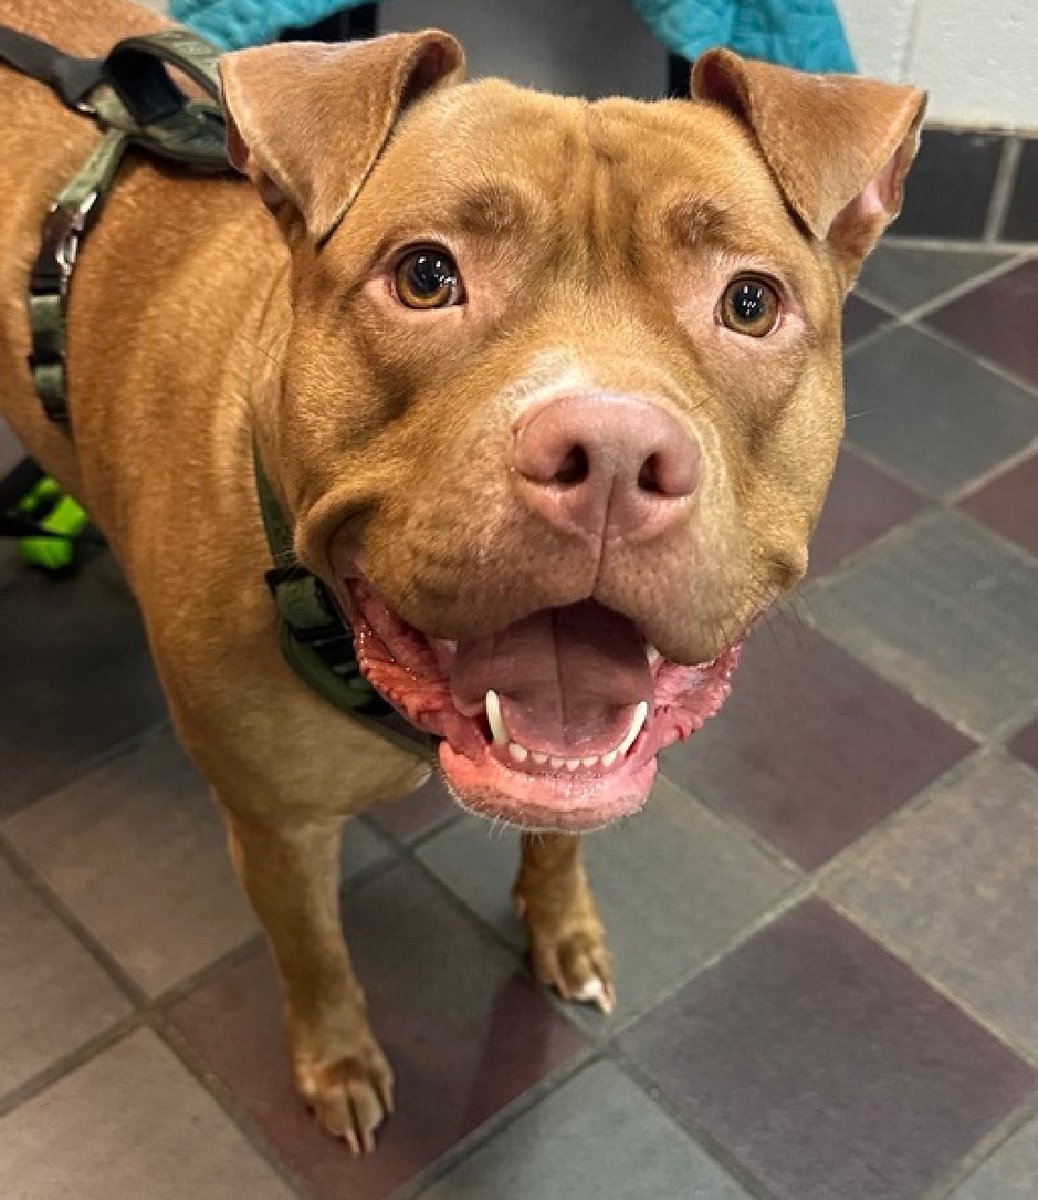 Canela 197114 arrived in NYCACC just APRIL 14 for the reasons 'kids not caring for animal'. On Saturday April 20 she could lose her life. Just 2 years old and she's so terrified to come out of her kennel, with whale eyes she thrashes to avoid the leash. A friendly girl who is